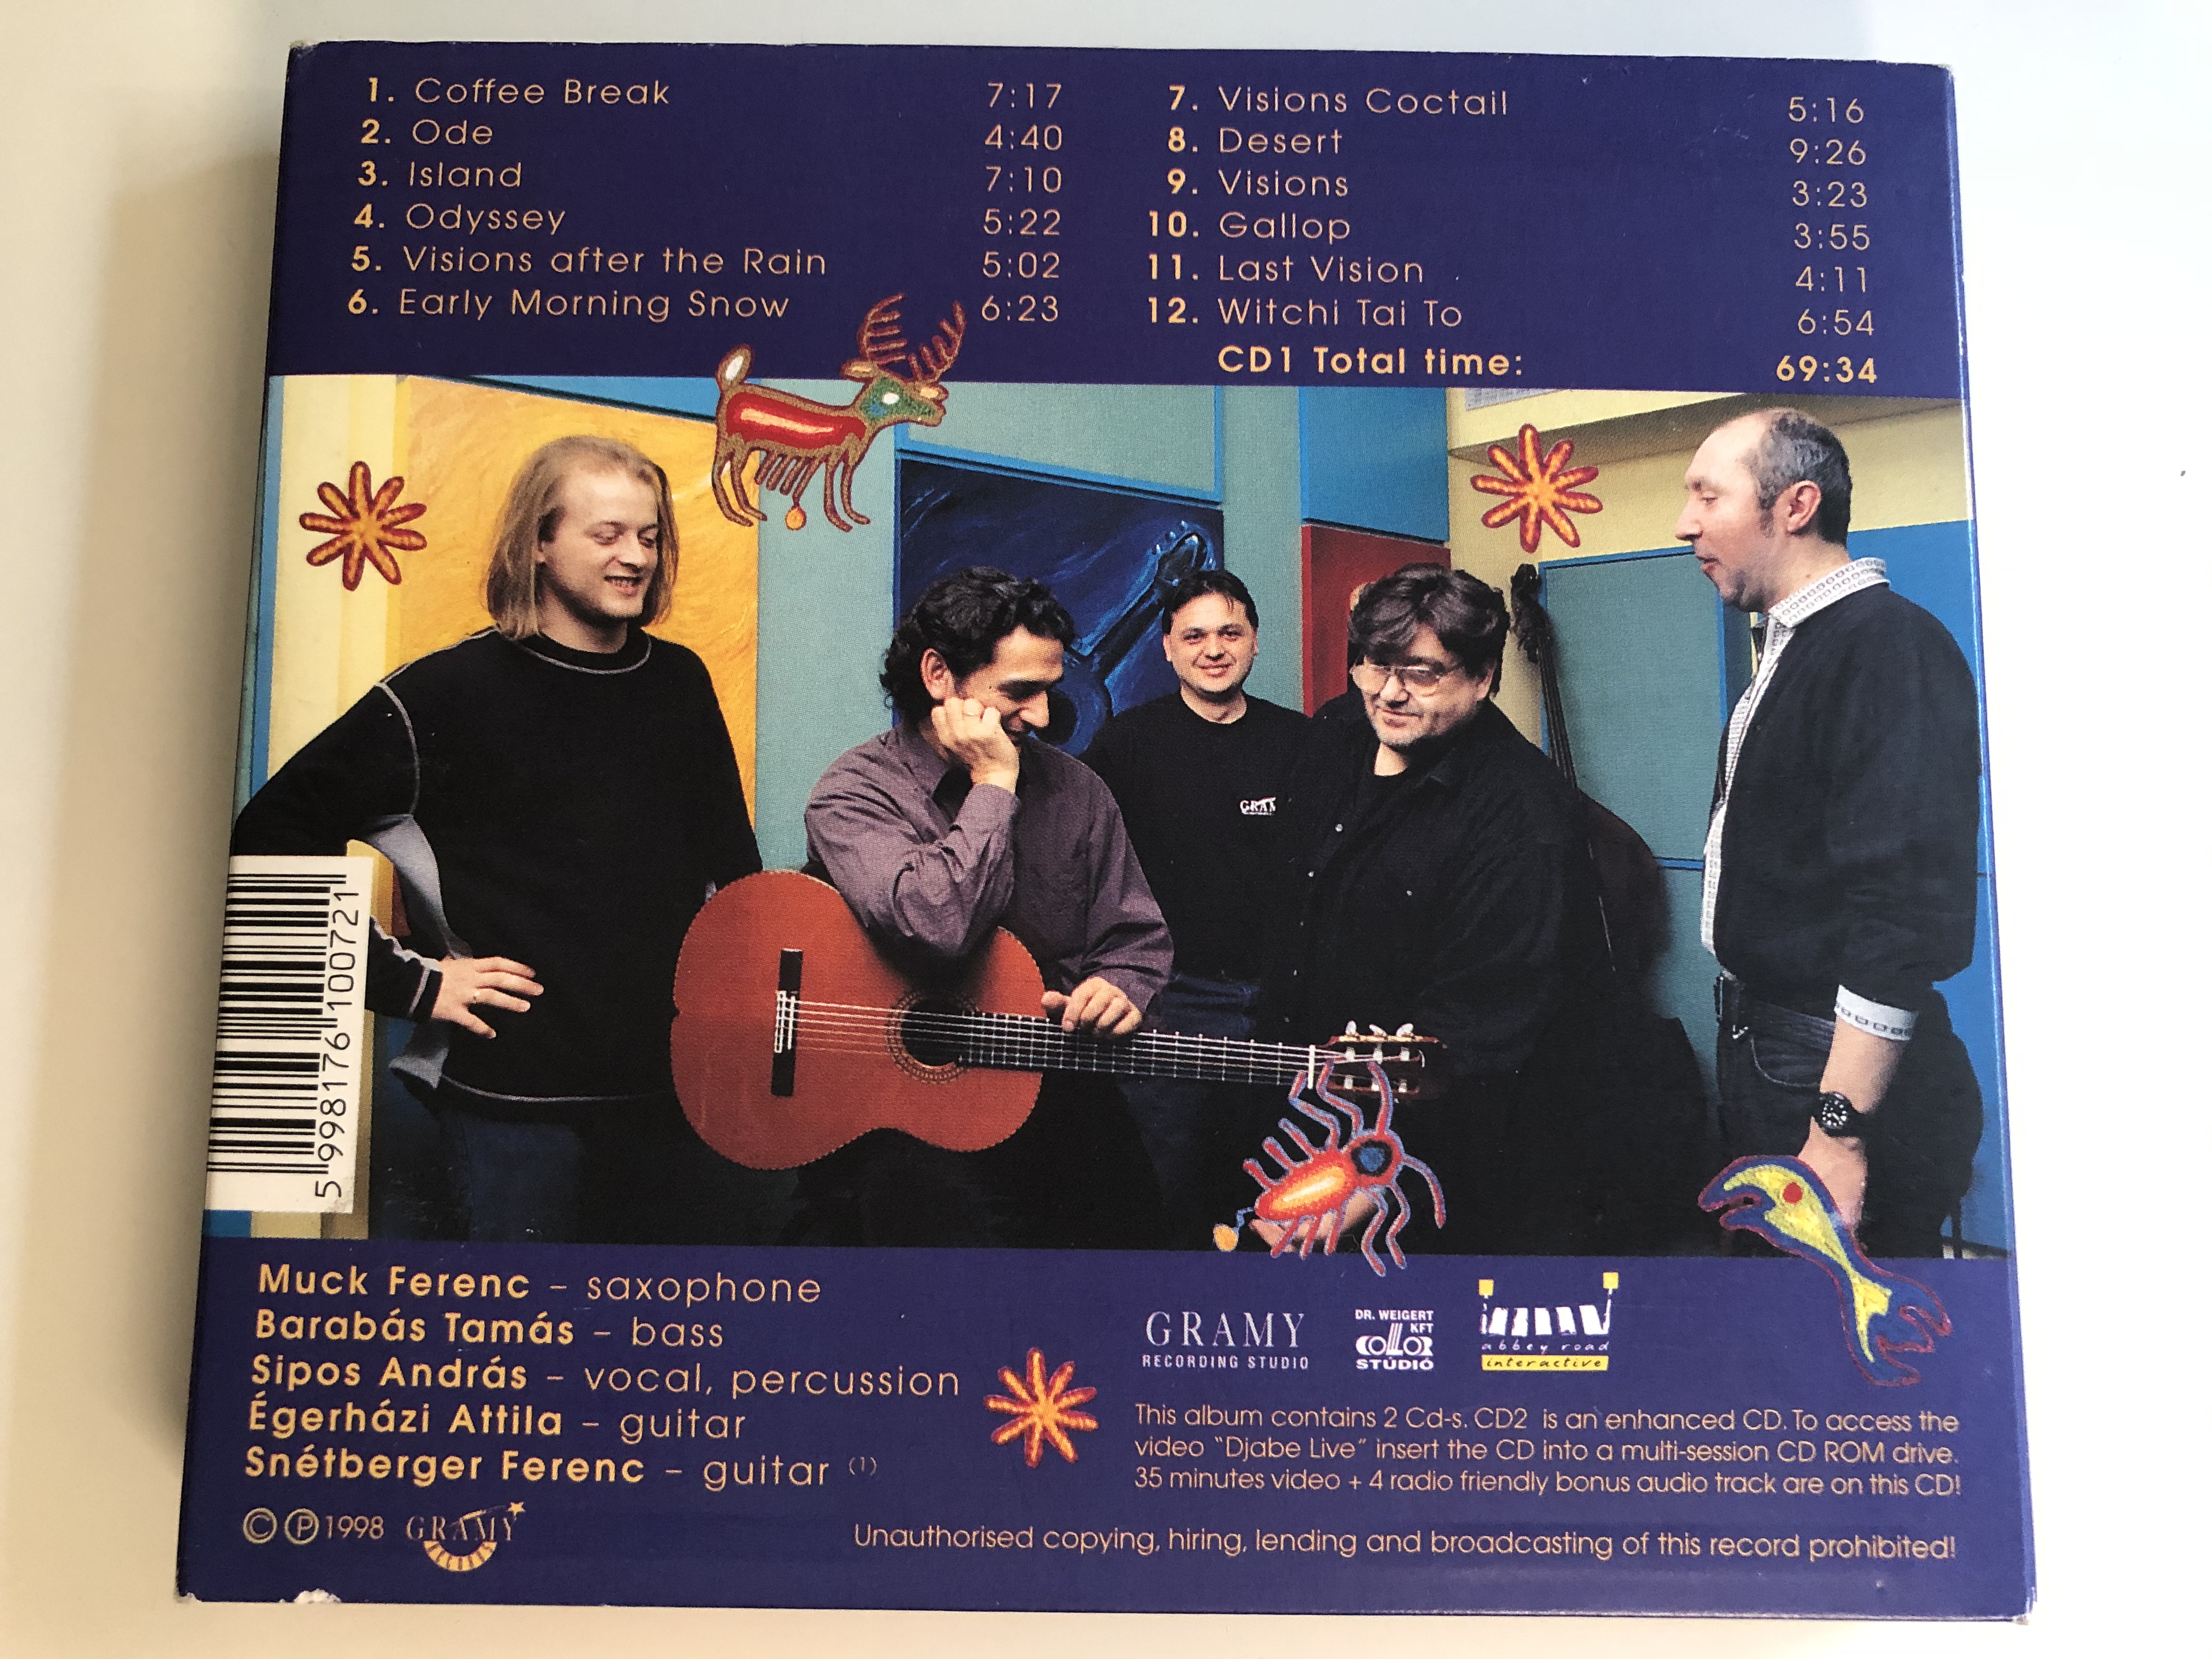 djabe-special-guest-ferenc-snetberger-witchi-tai-to-gramy-records-2x-audio-cd-1998-gr-007-15-.jpg